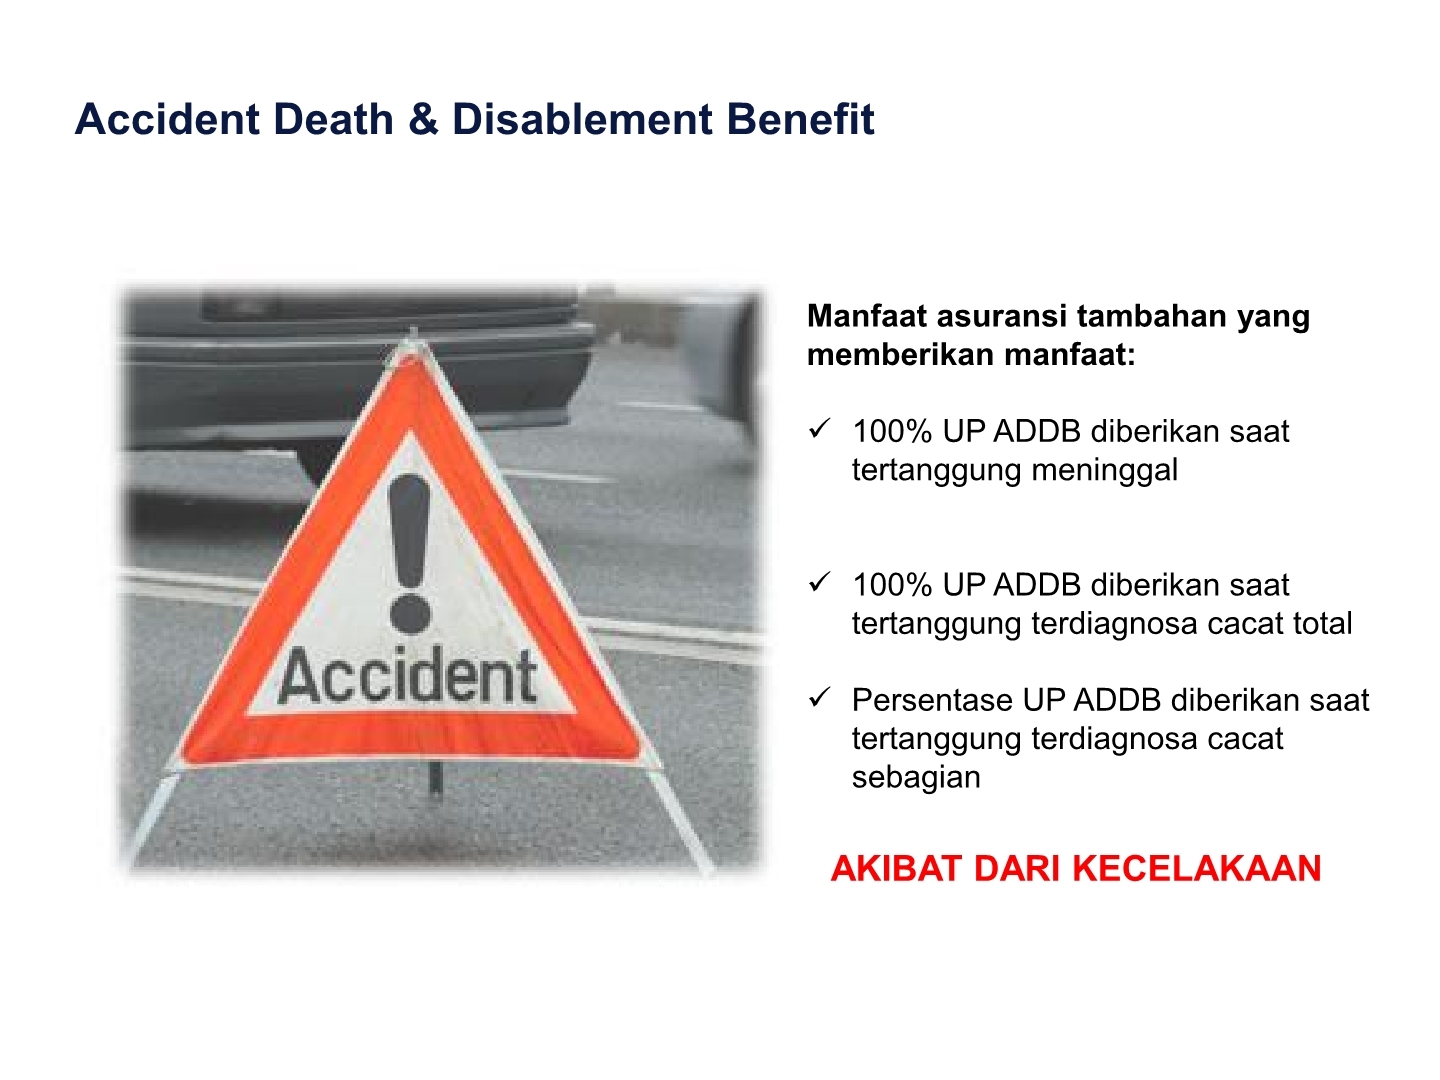 accidental death and disability benefit